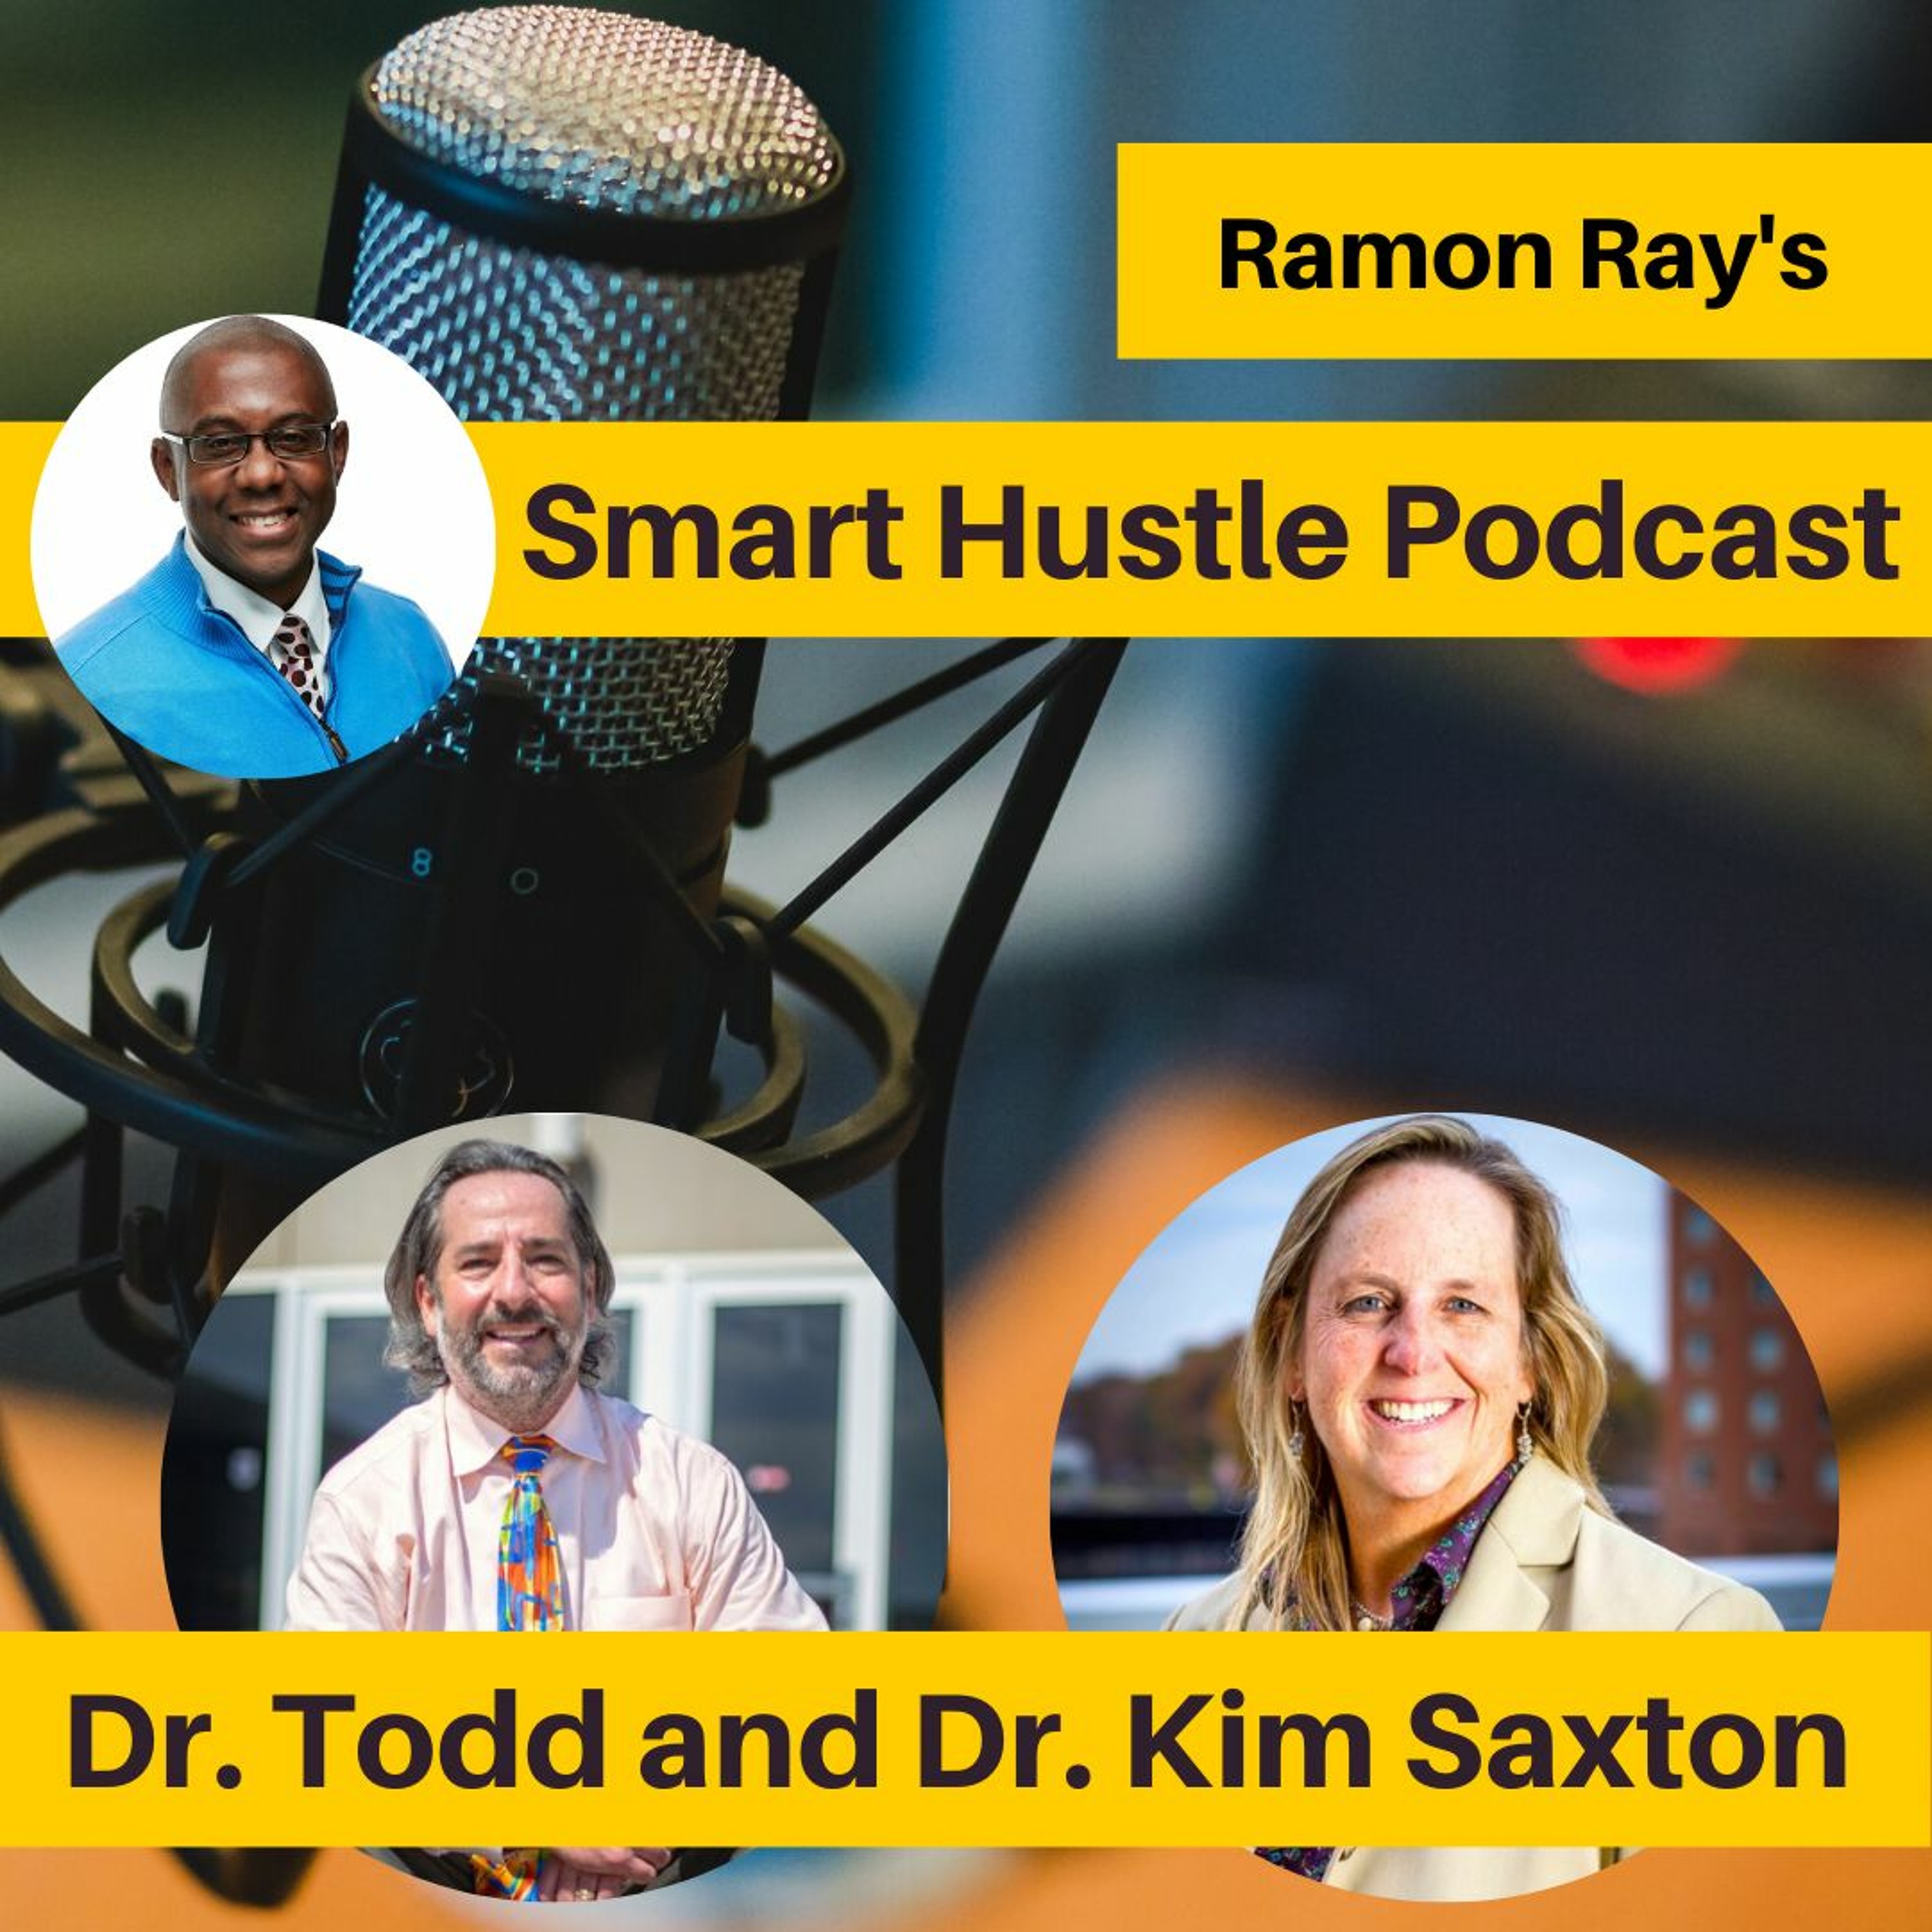 How to Prepare for the Unkown - Dr. Todd Saxton and Dr. Kim Saxton